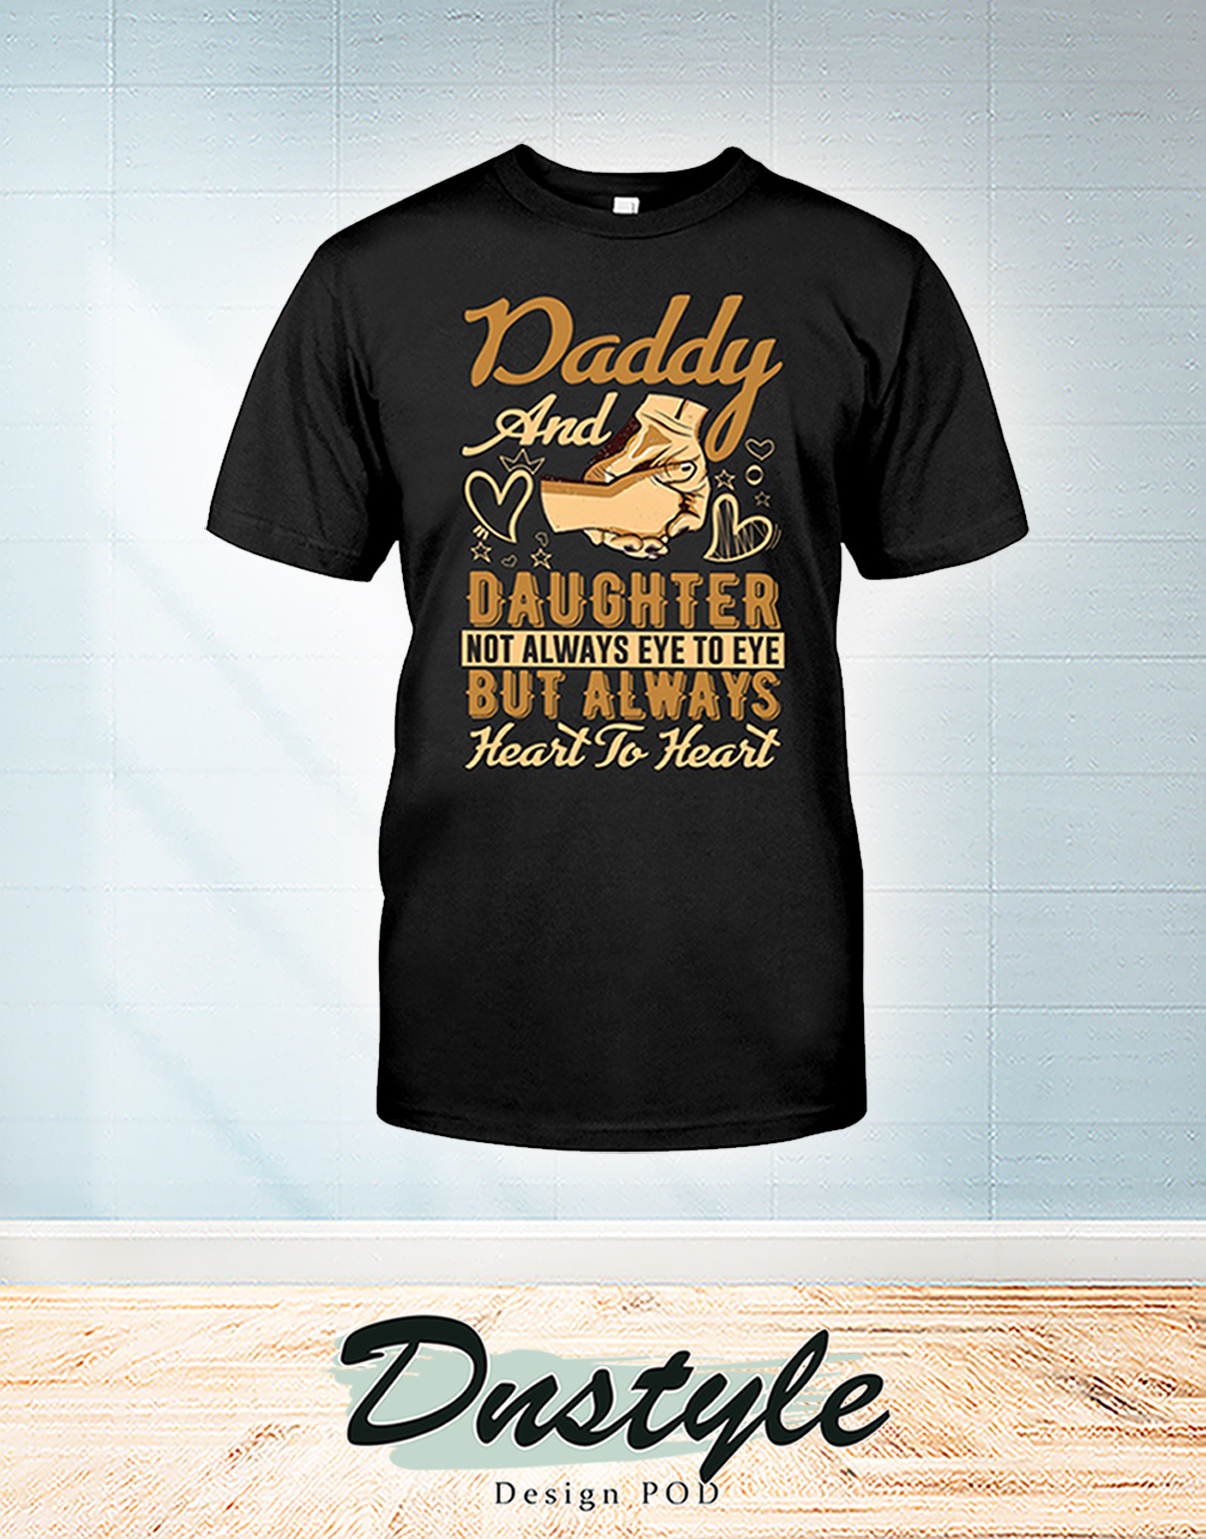 Holding hands Daddy and daughter not alway eye to eye but alway heart to heart shirt